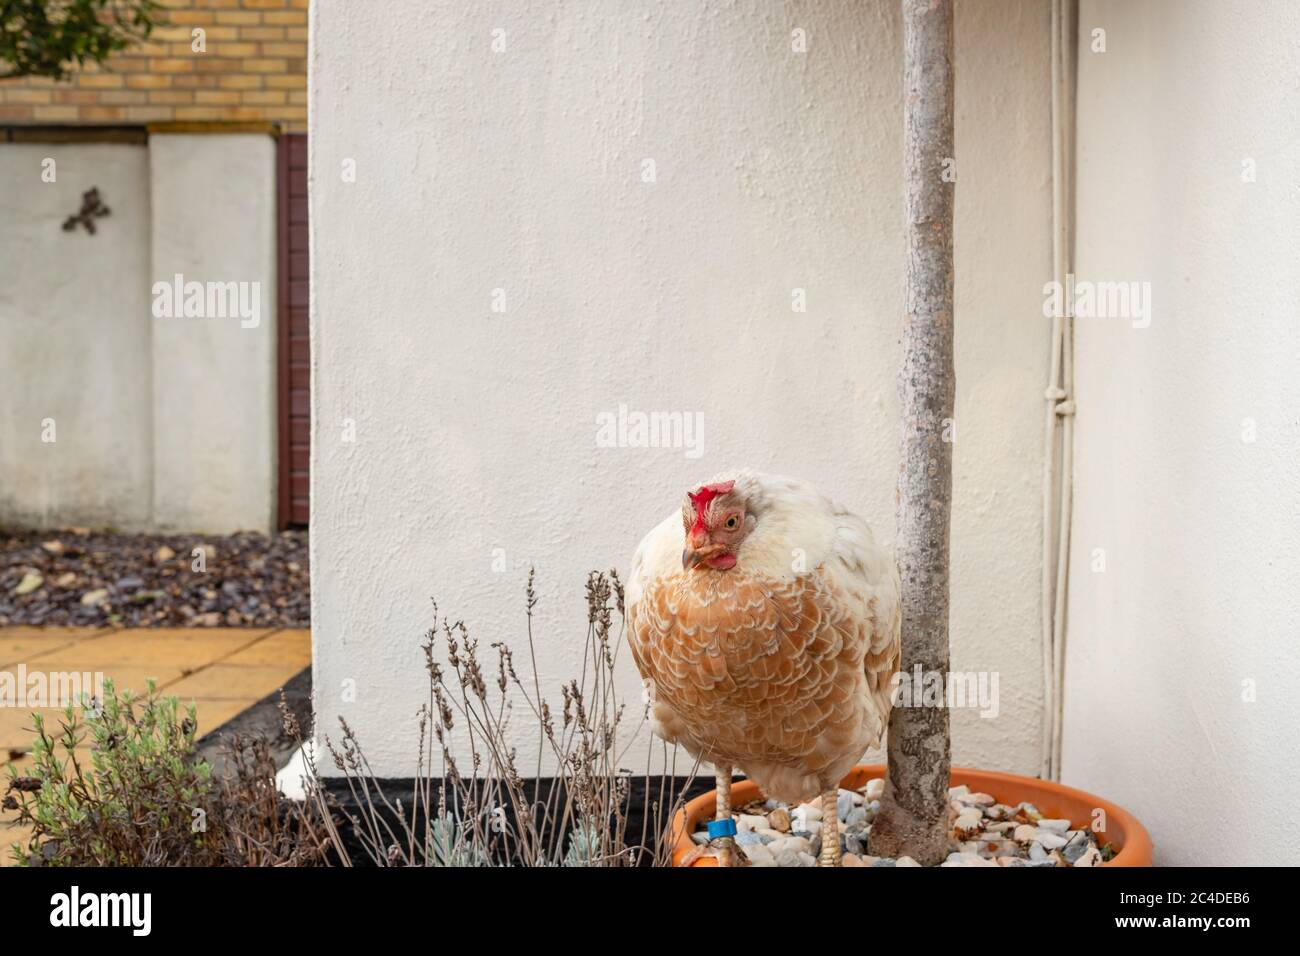 Adult hen seen sitting on a plant pot outside the back door of a house. Stock Photo